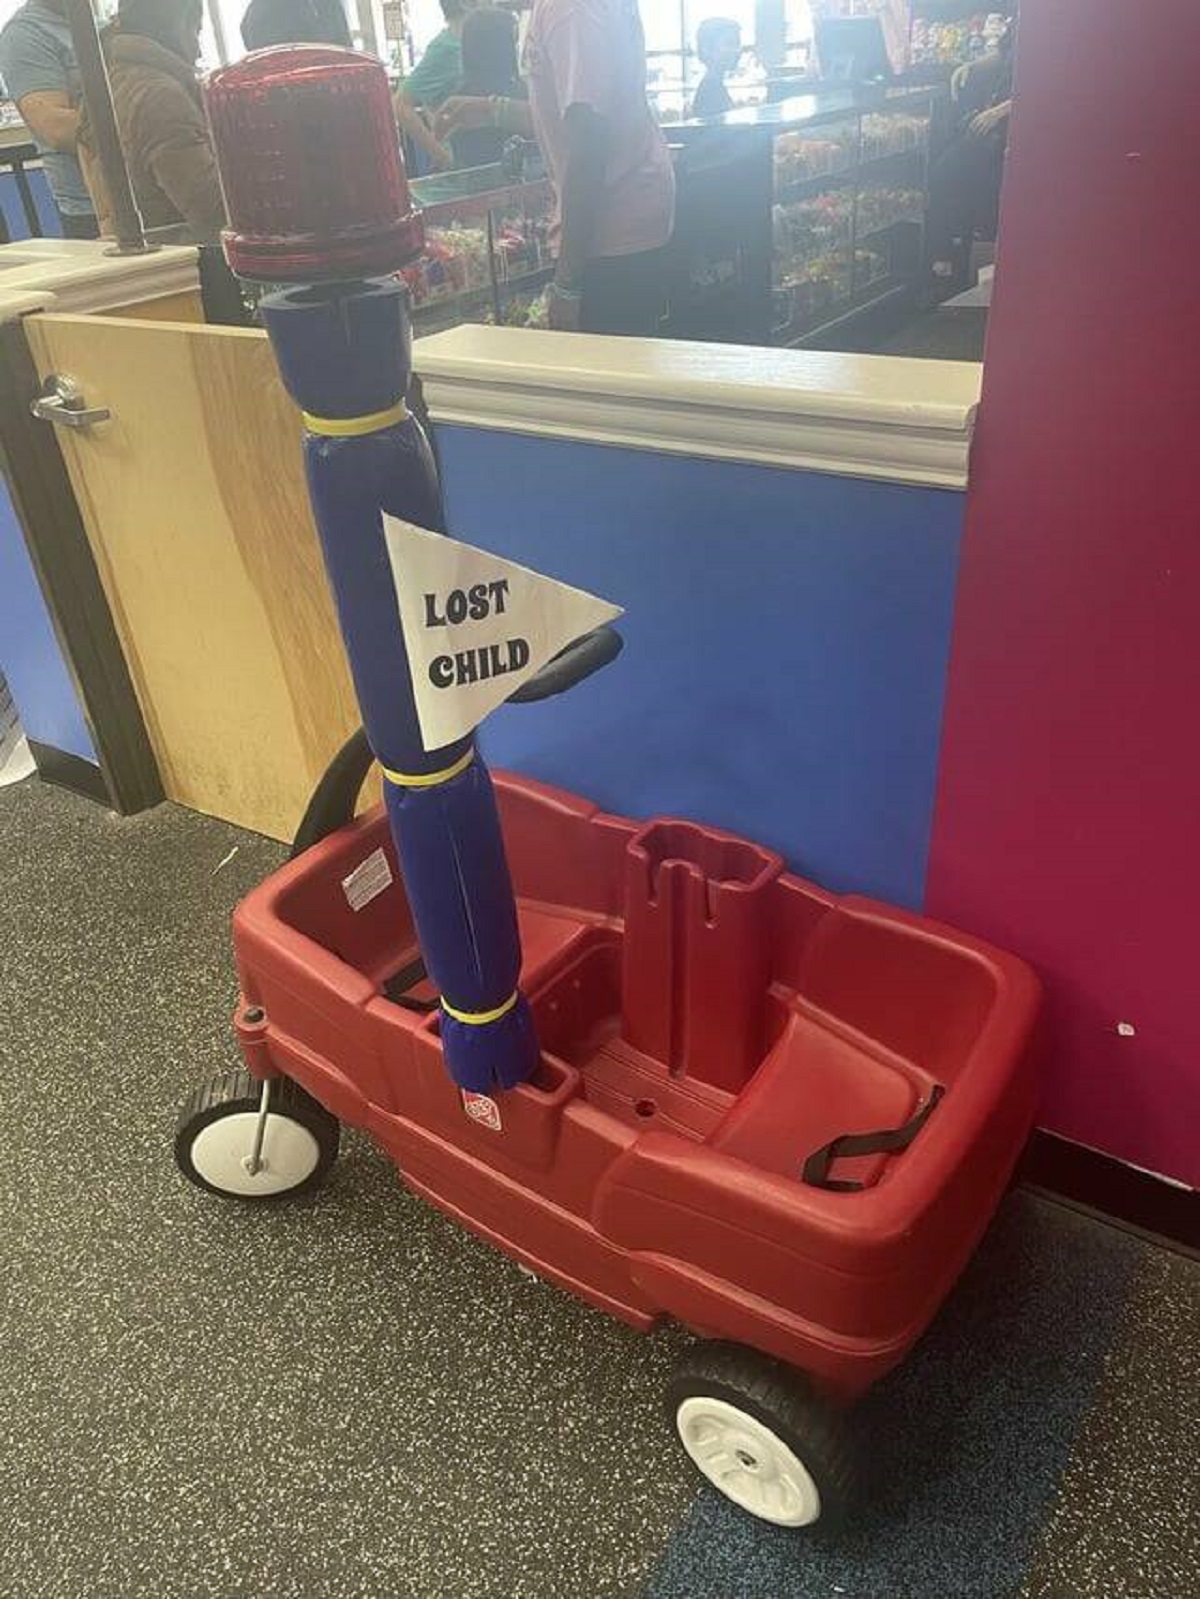 "The Lost-Child-Mobile at our local play place"